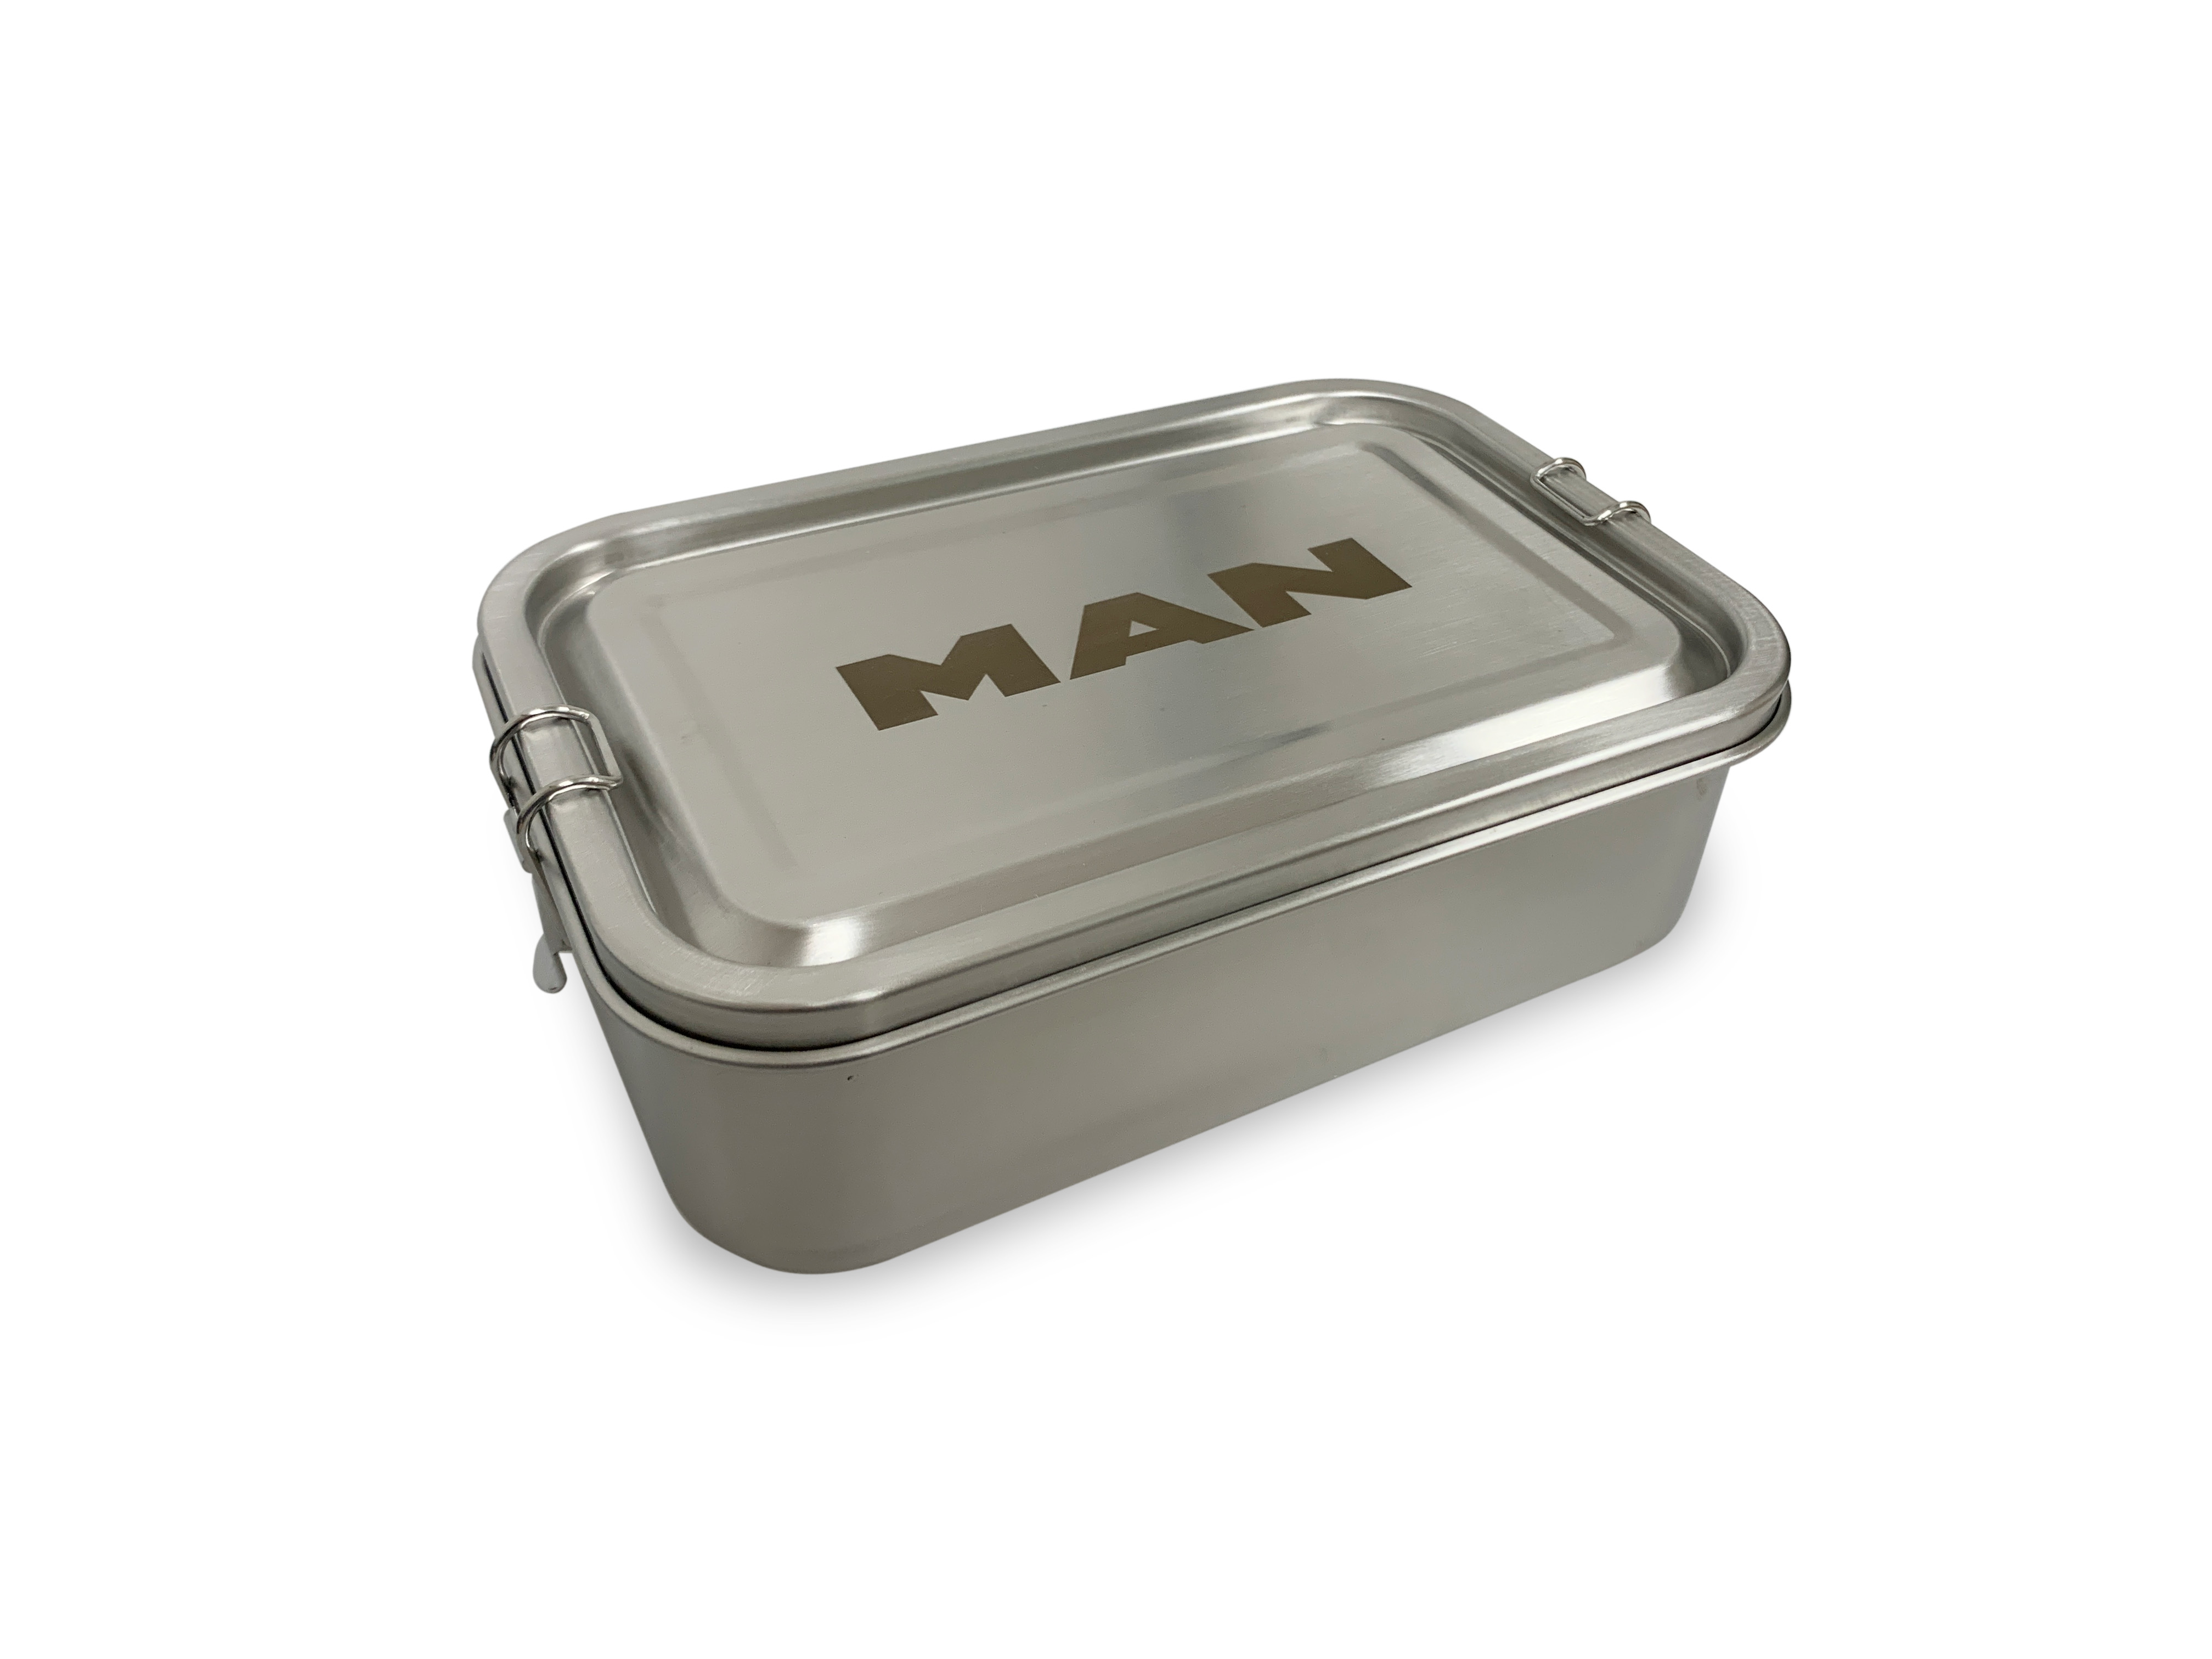 MAN lunch box snack box stainless steel